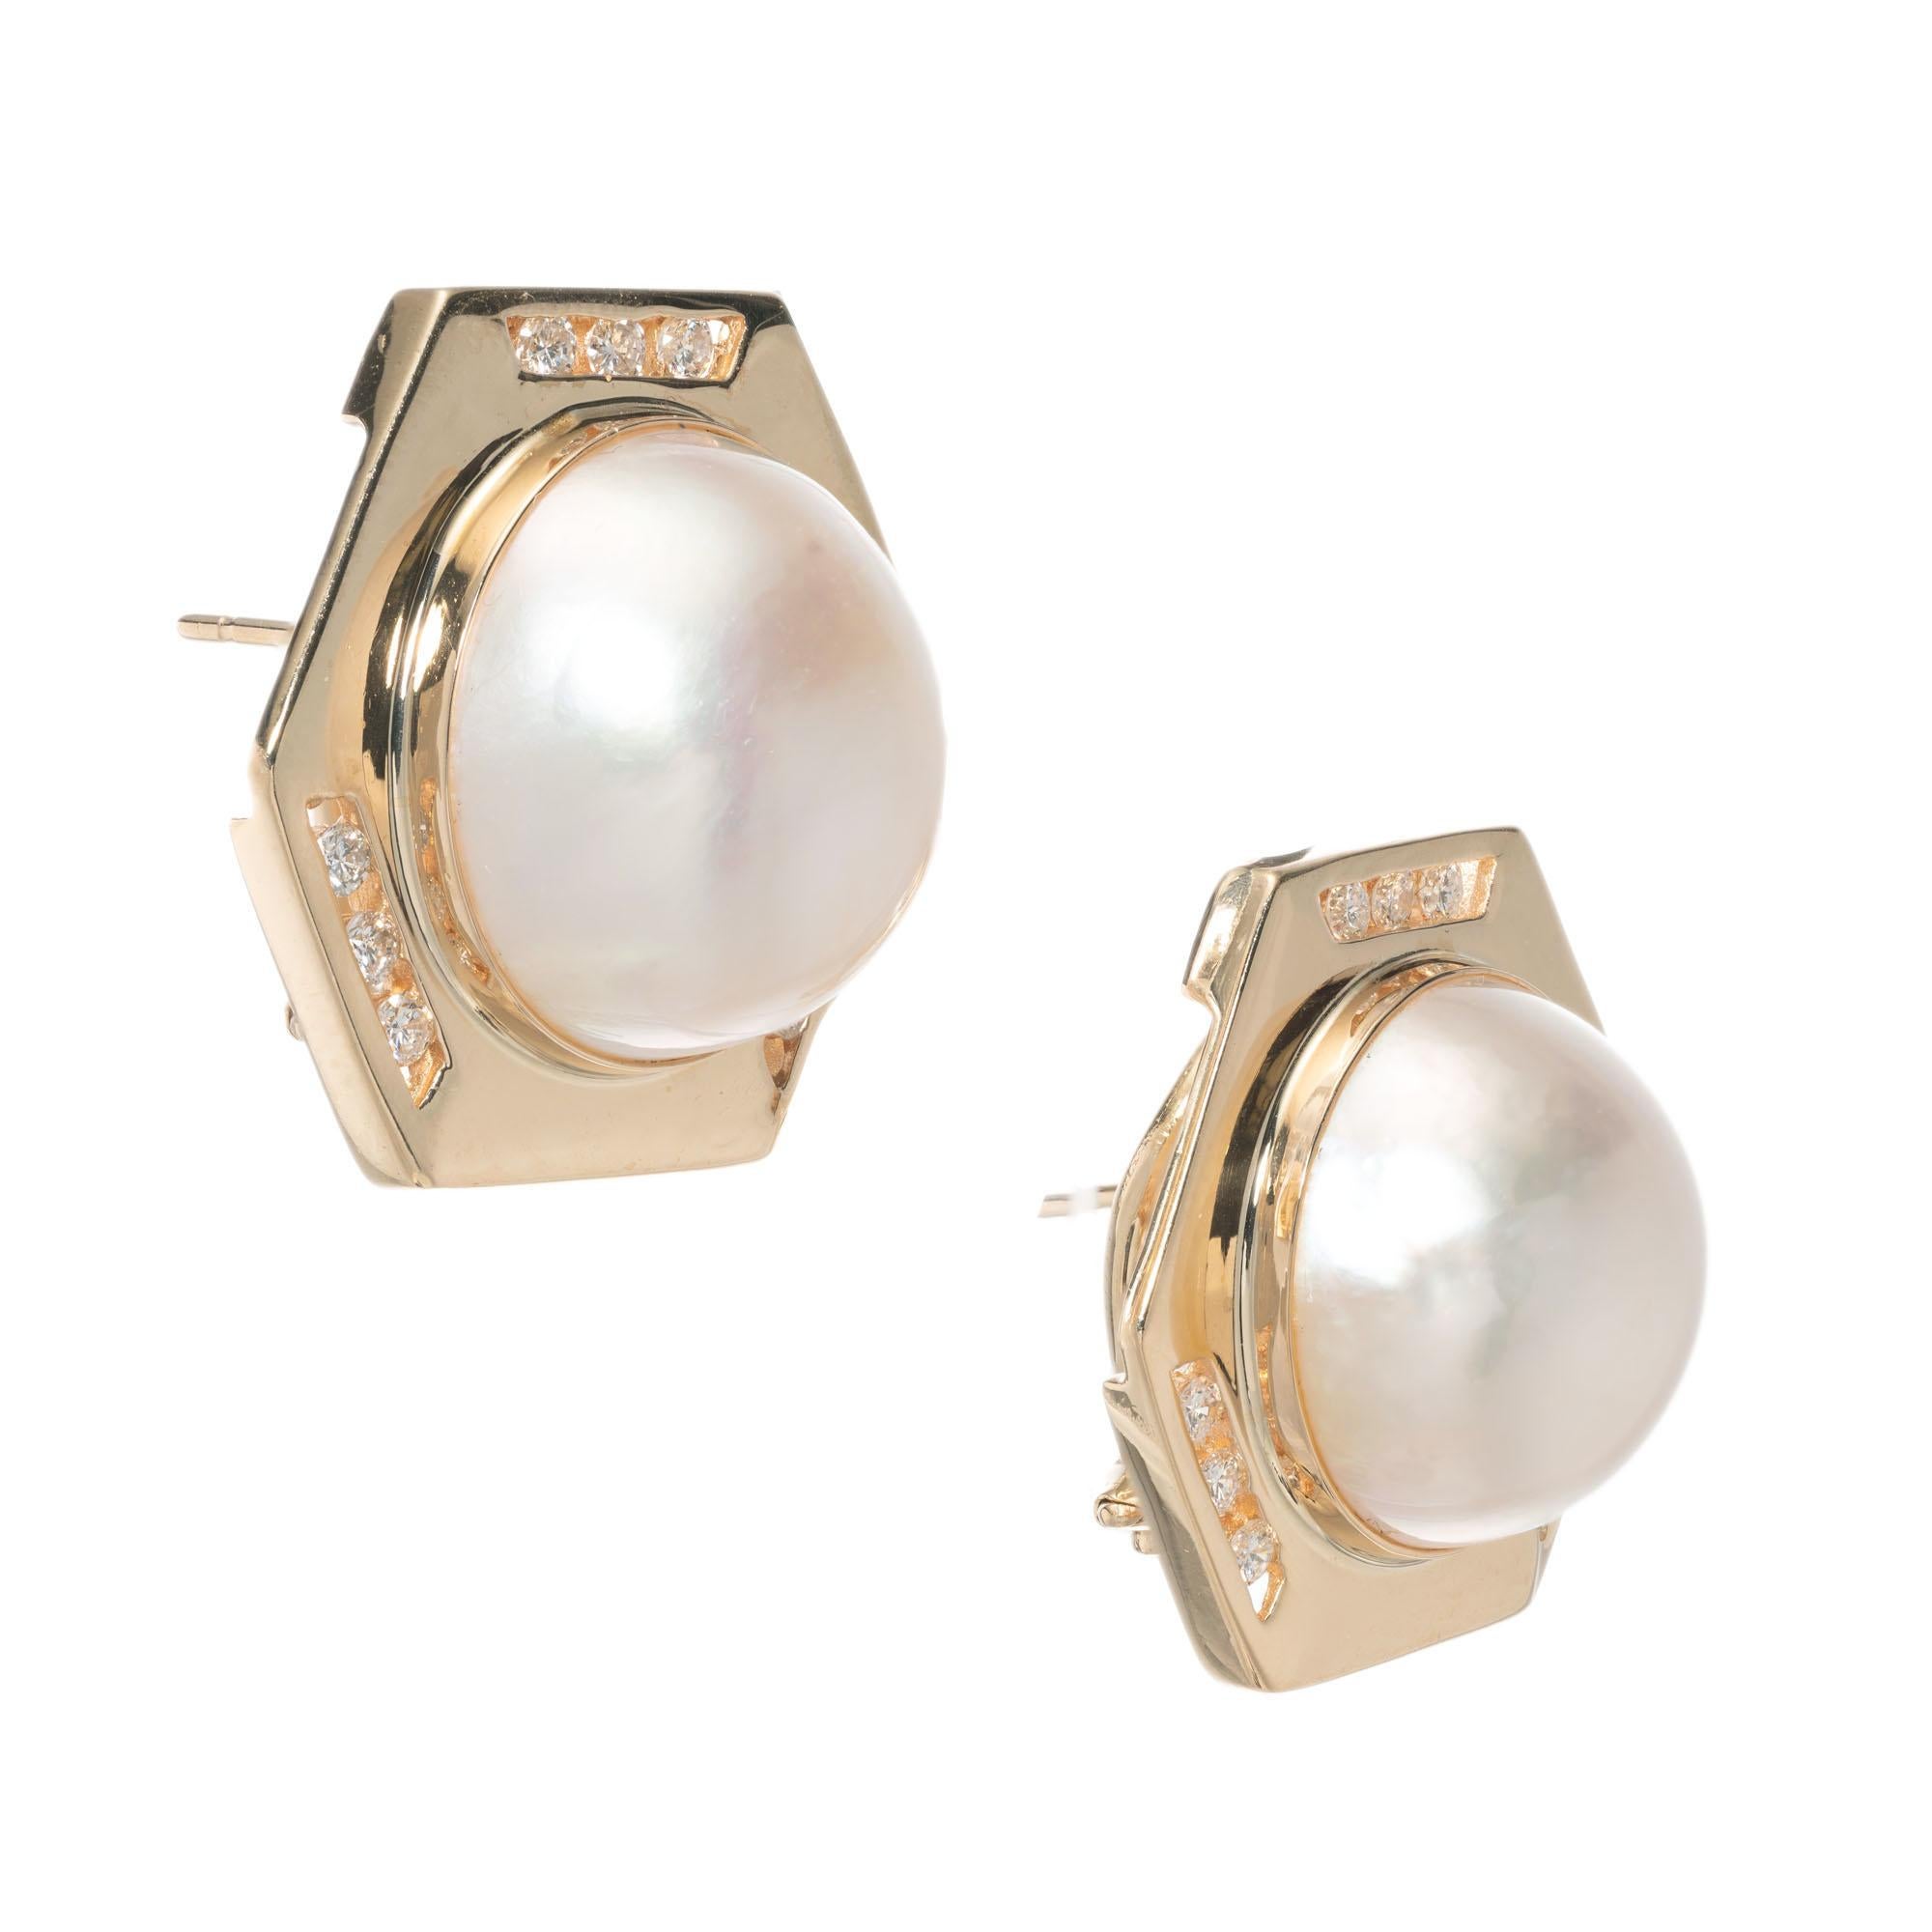 15mm Mabe pearl clip post diamond earrings in 14k yellow gold 

18 round brilliant cut diamonds I VS approx. .45cts
2 Mabe rose hue pearls .15mm
14k yellow gold 
Stamped: 14k
13.8 grams
Top to bottom: 22mm or 7/8 Inch
Width: 24.4mm or 5/16